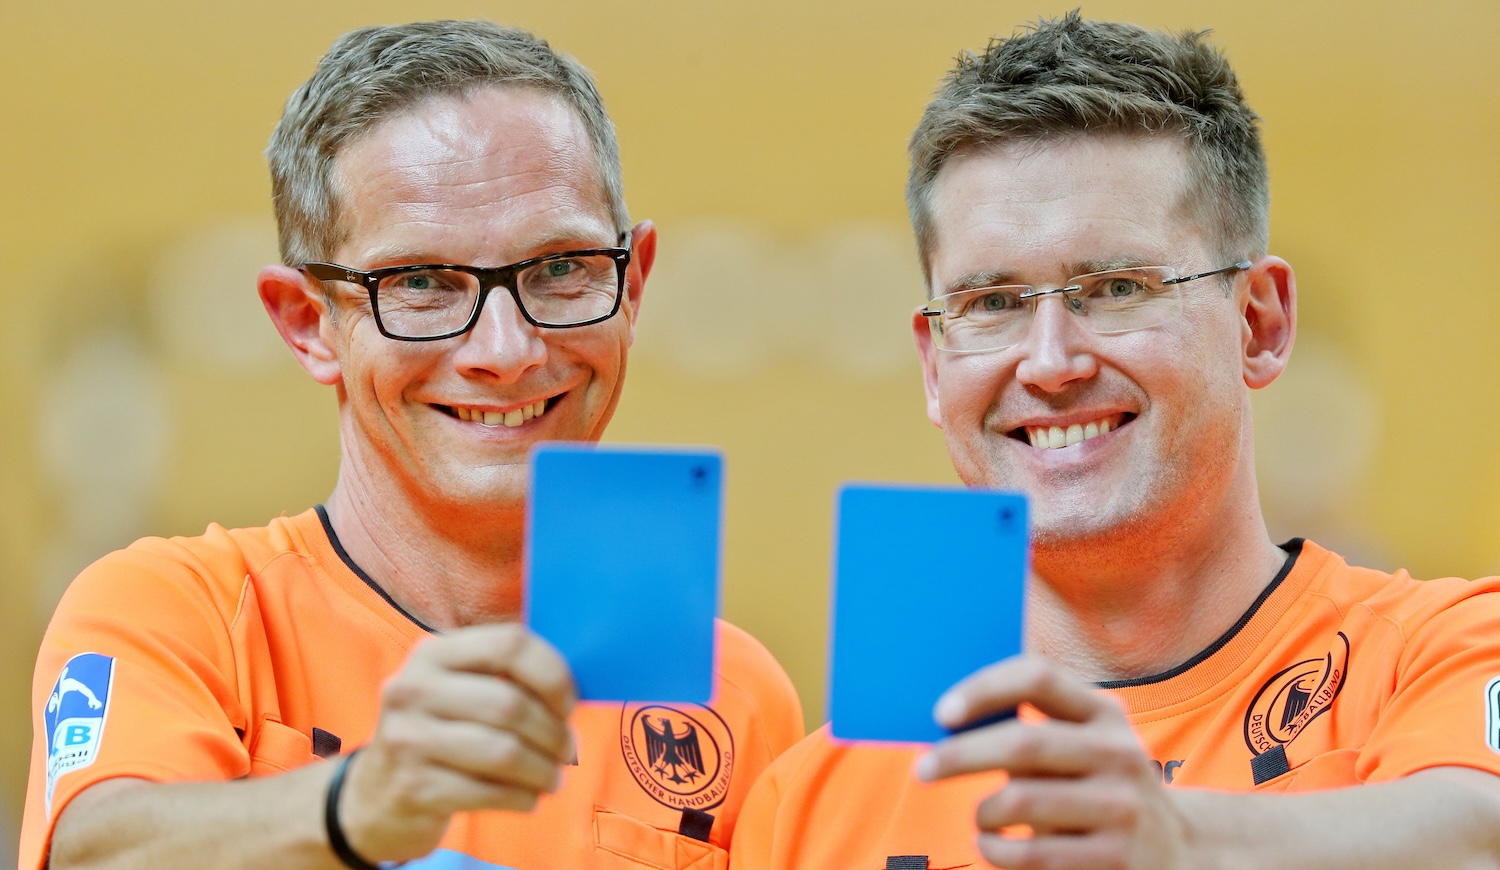 Handball referees Marcus Helbig (l) and Lars Geipel show the new blue cards in Leipzig, Germany, 1 August 2016. The two will be refereeing at the Olympic games for the second time. PHOTO: JAN WOITAS/DPA | usage worldwide (Photo by Jan Woitas/picture alliance via Getty Images)